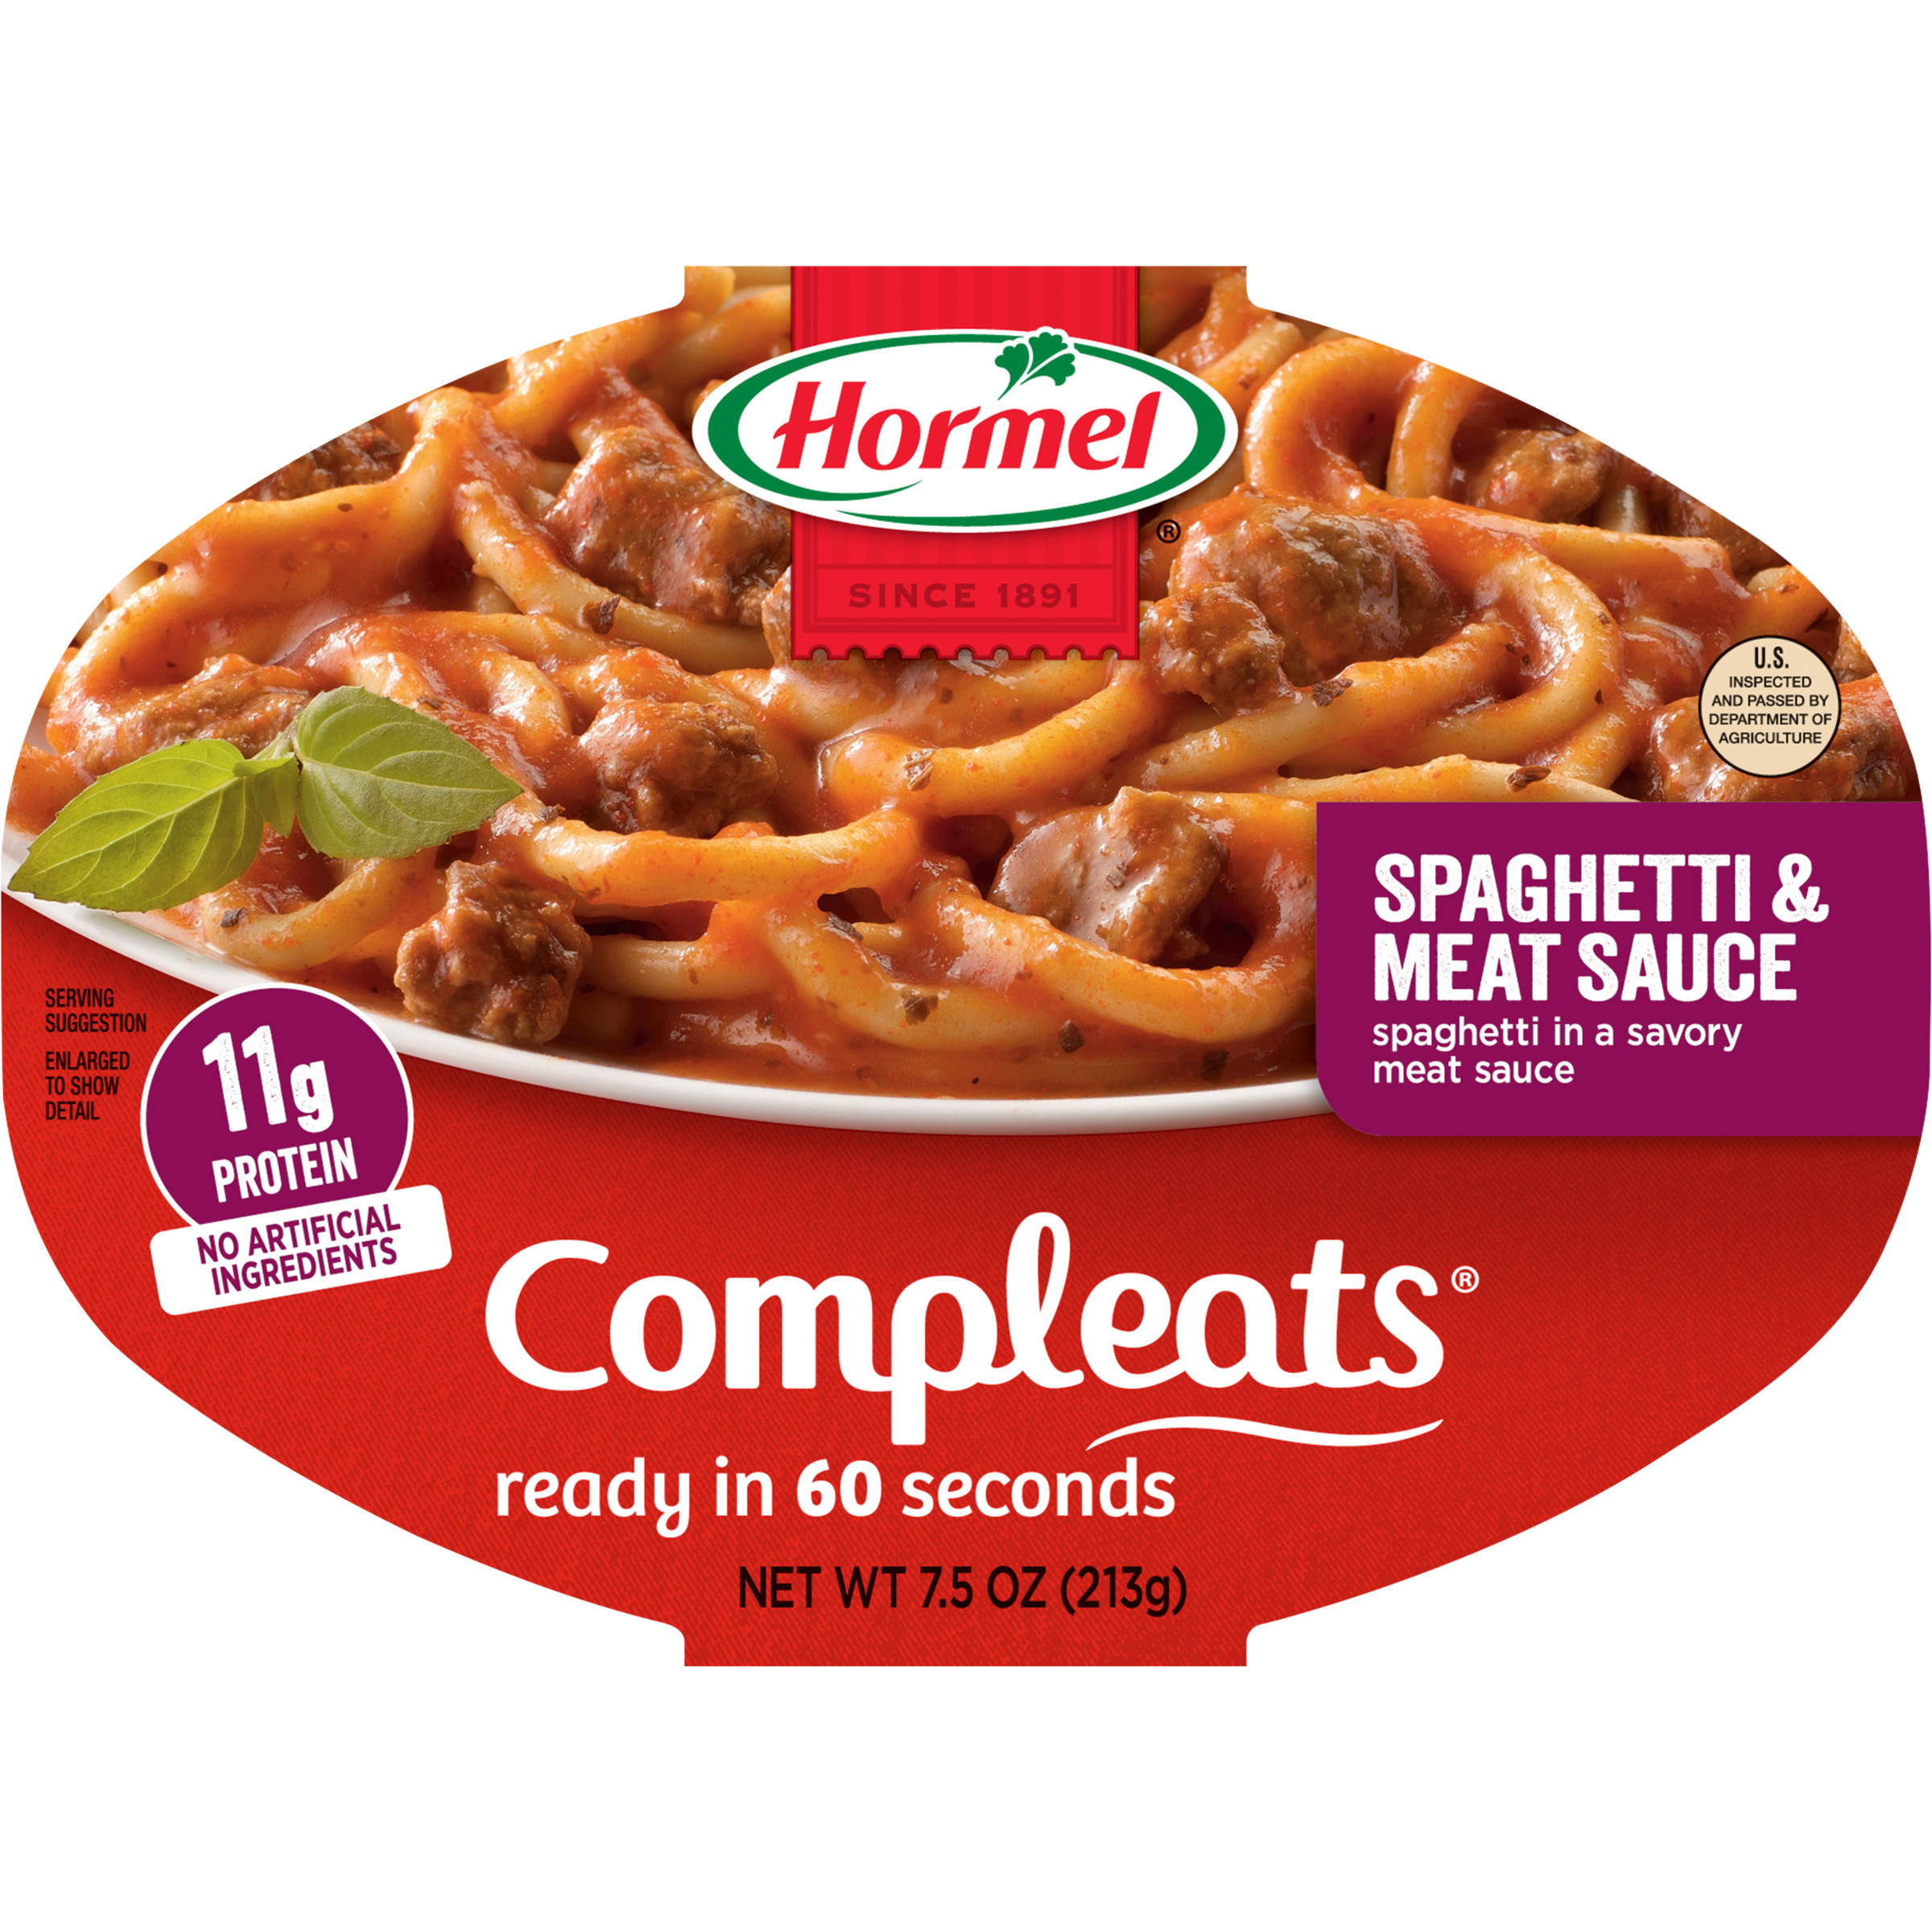 HORMEL COMPLEATS Spaghetti & Meat Sauce, Shelf Stable, 7.5 oz Plastic Tray - image 1 of 18